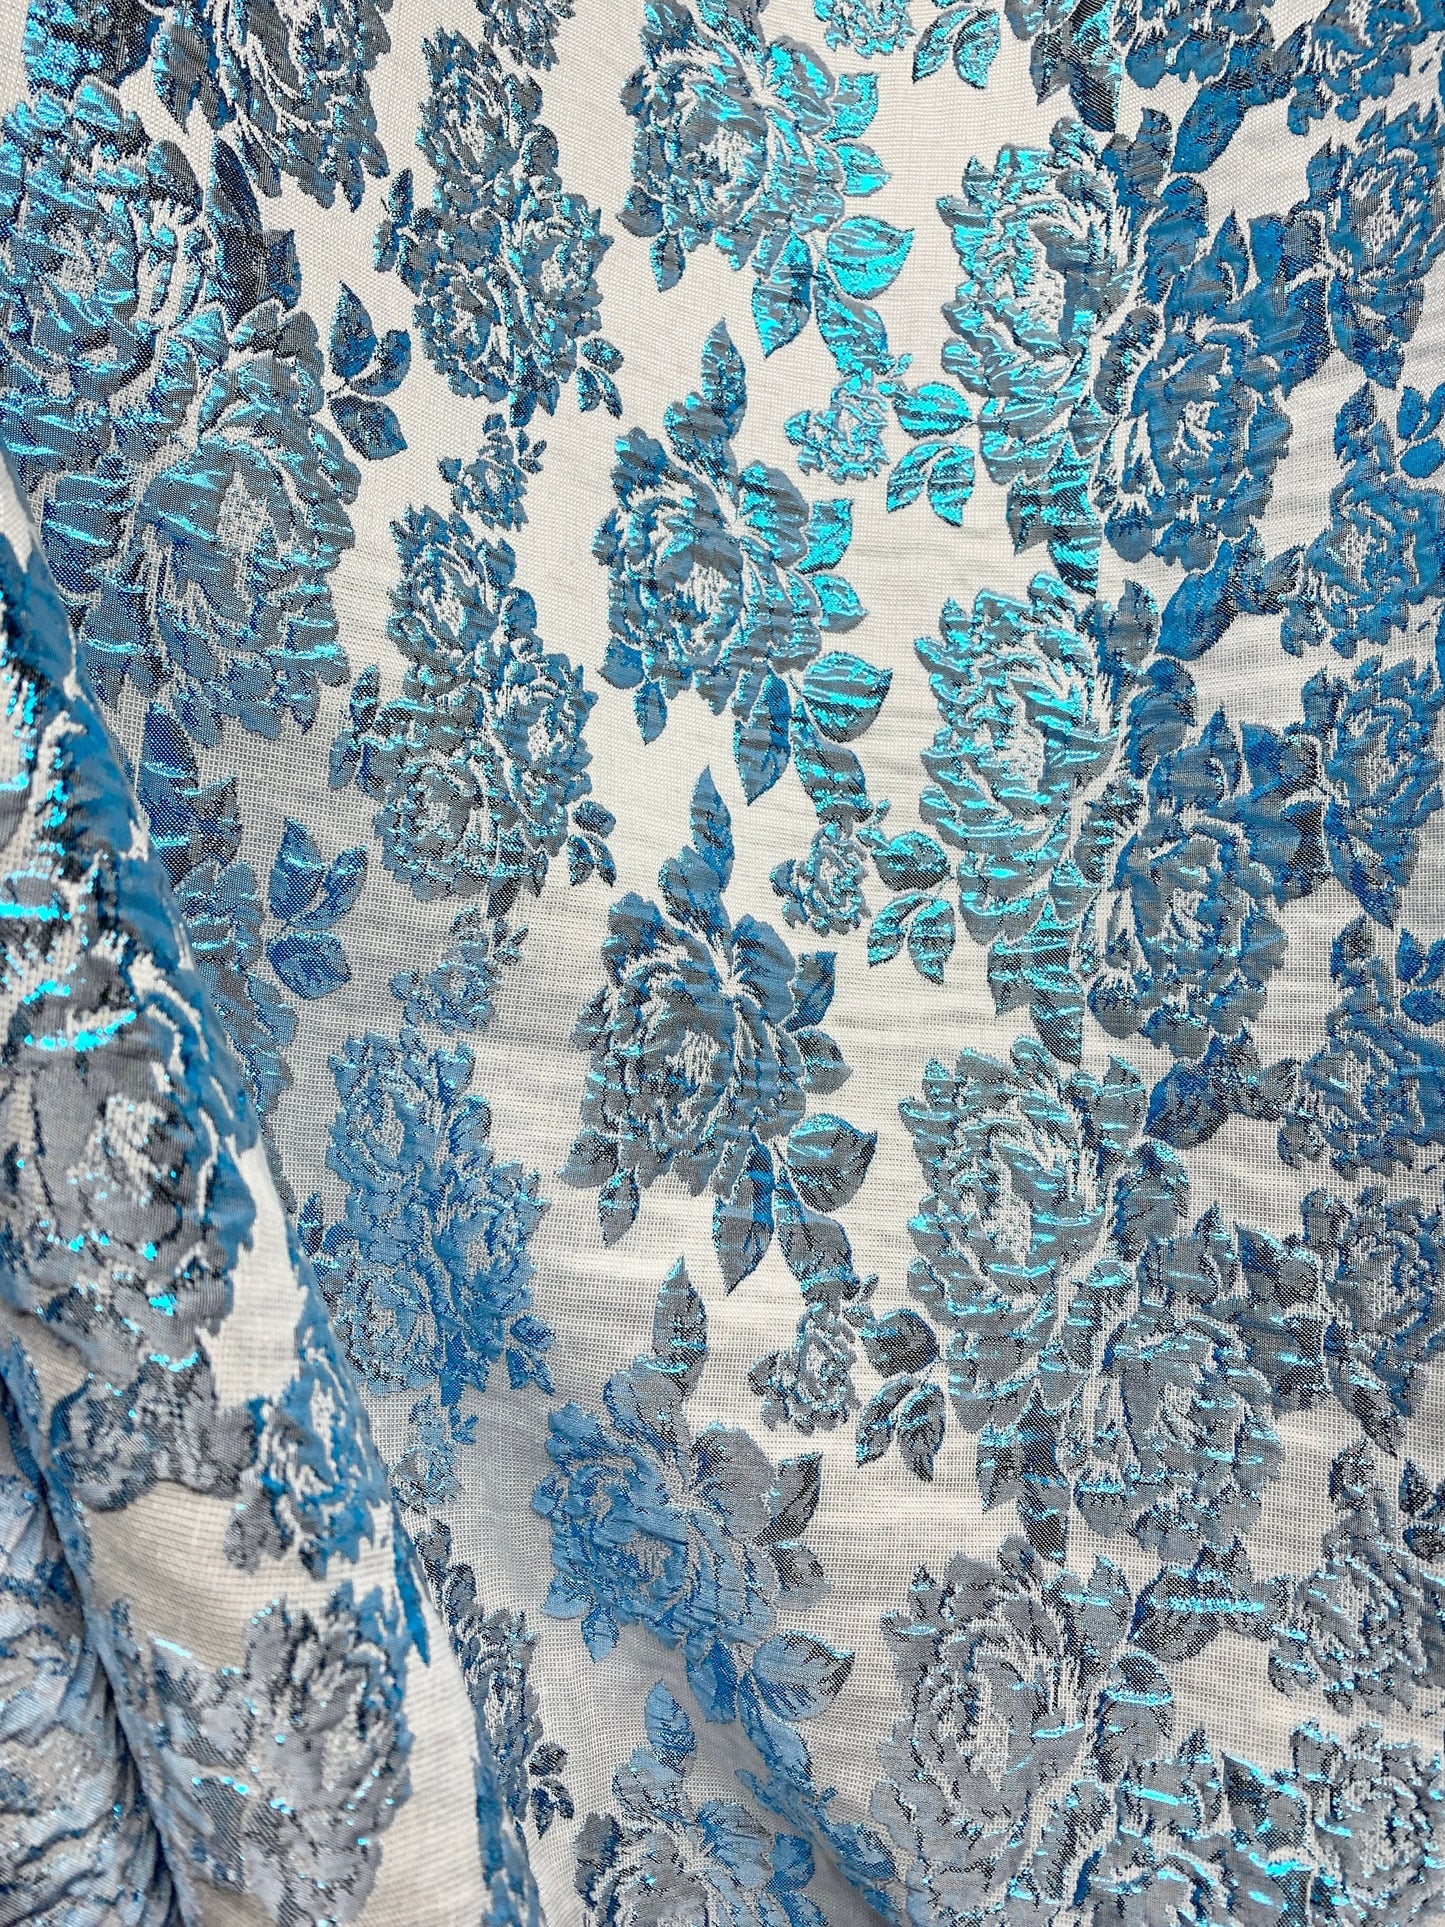 TURQUOISE BLUE WHITE Floral Brocade Fabric (60 in.) Sold By The Yard